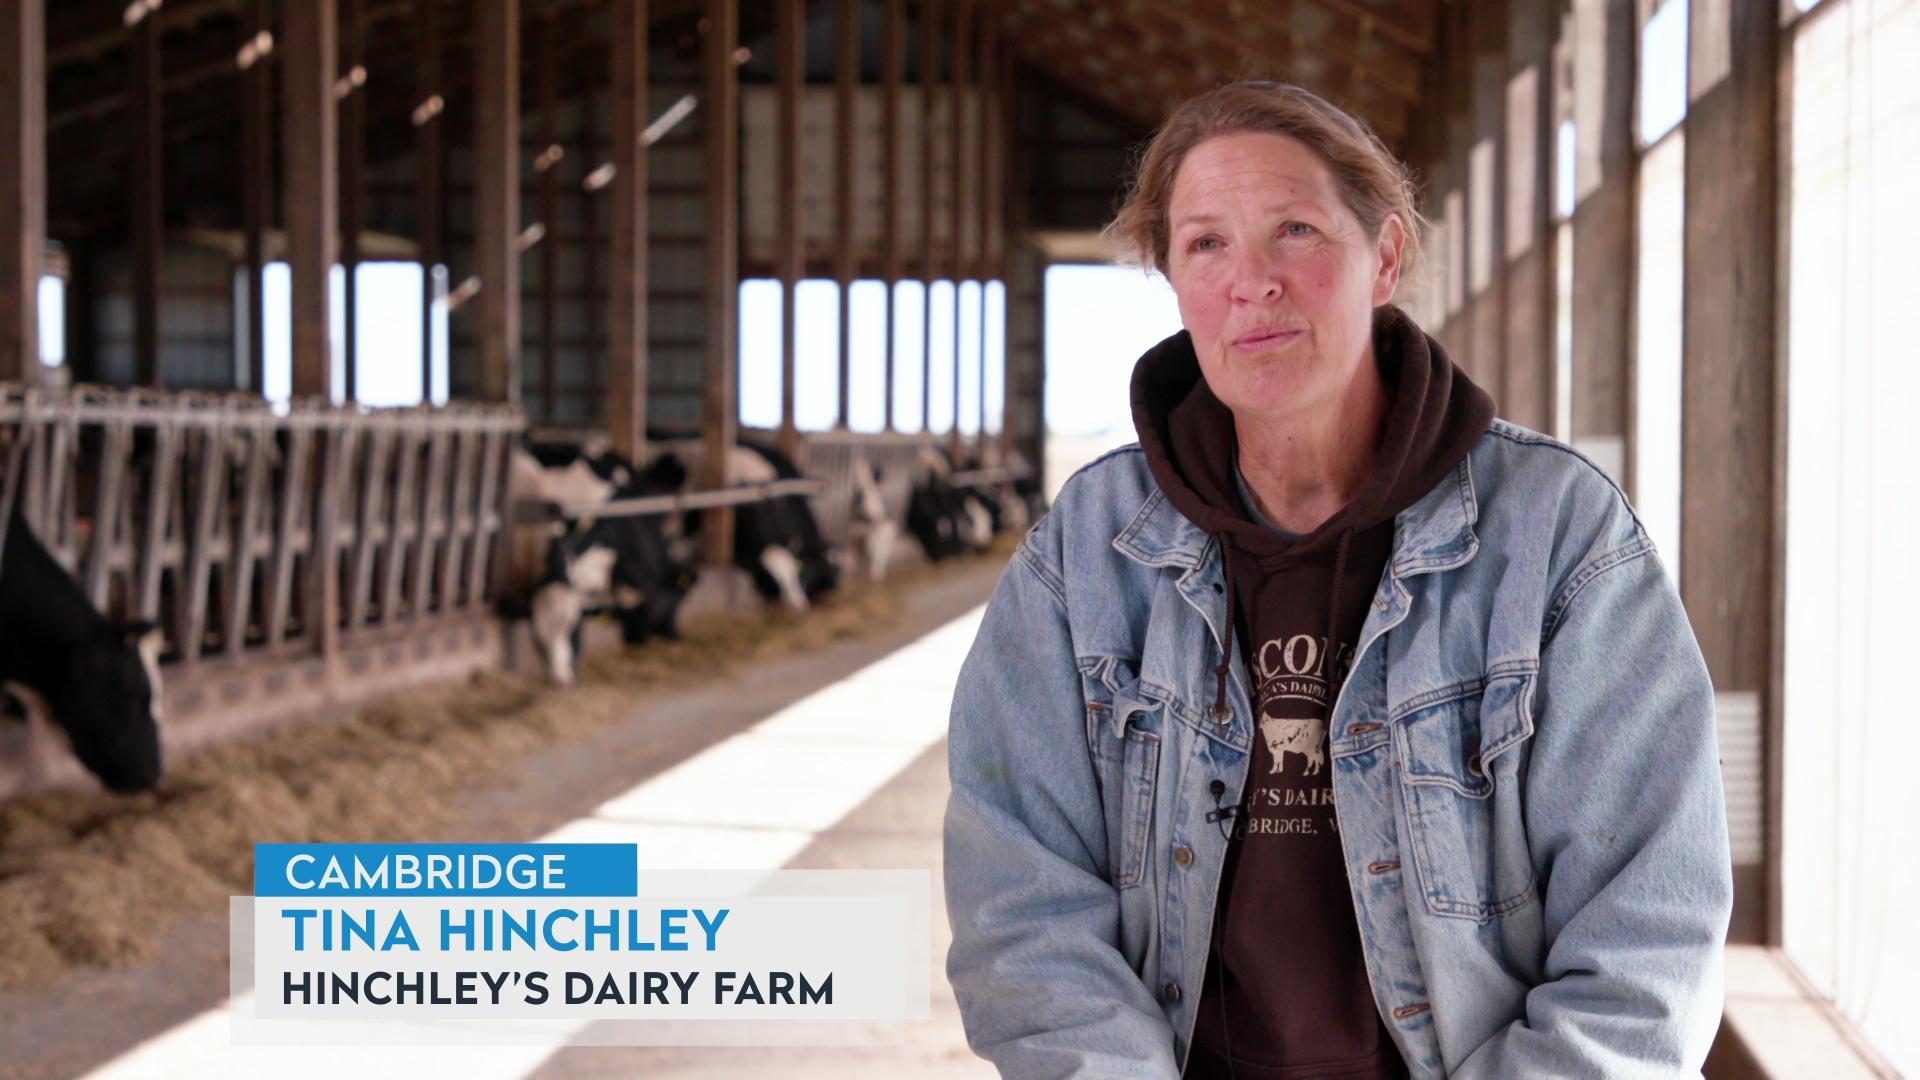 Tina Hinchley on growing milk production by dairy farms